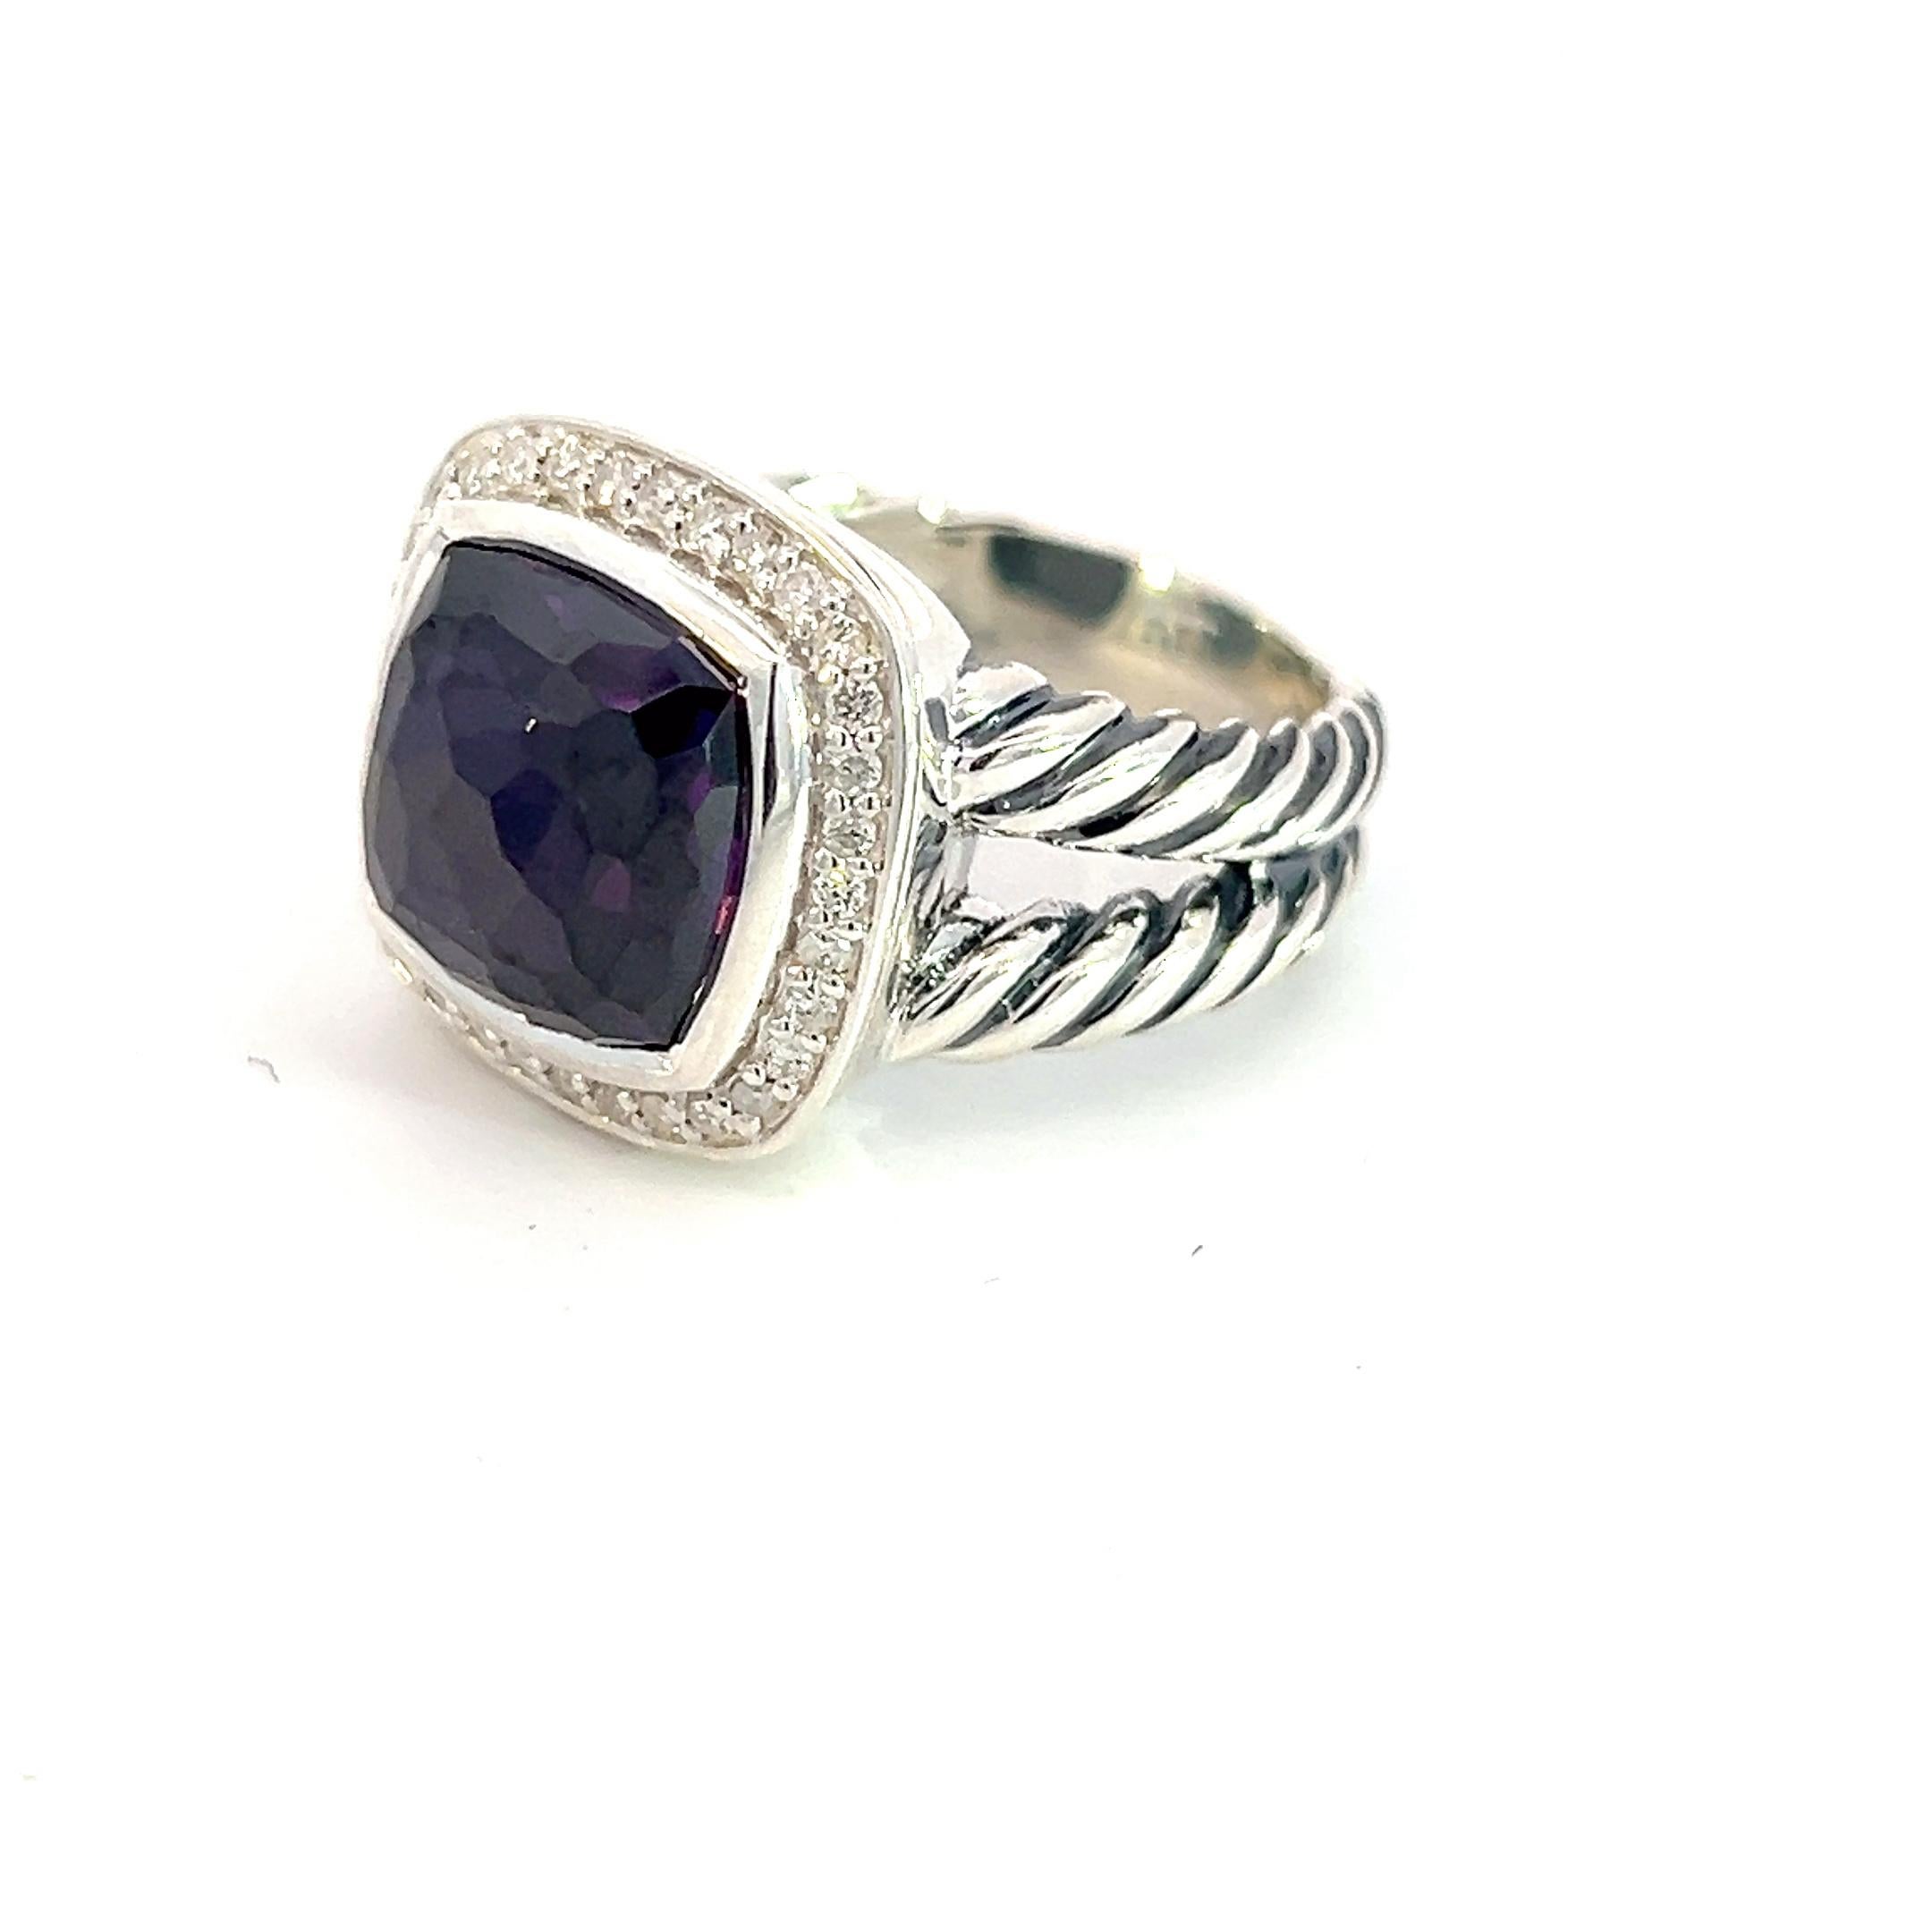 Authentic David Yurman Black Orquid Diamond Albion Ring Size 7.5 0.22 Ct Sil 15 mm DY372

Retail: $999.00

Ring from ALBION COLLECTION

This elegant Authentic David Yurman ring is made of sterling silver.

TRUSTED SELLER SINCE 2002

PLEASE SEE OUR